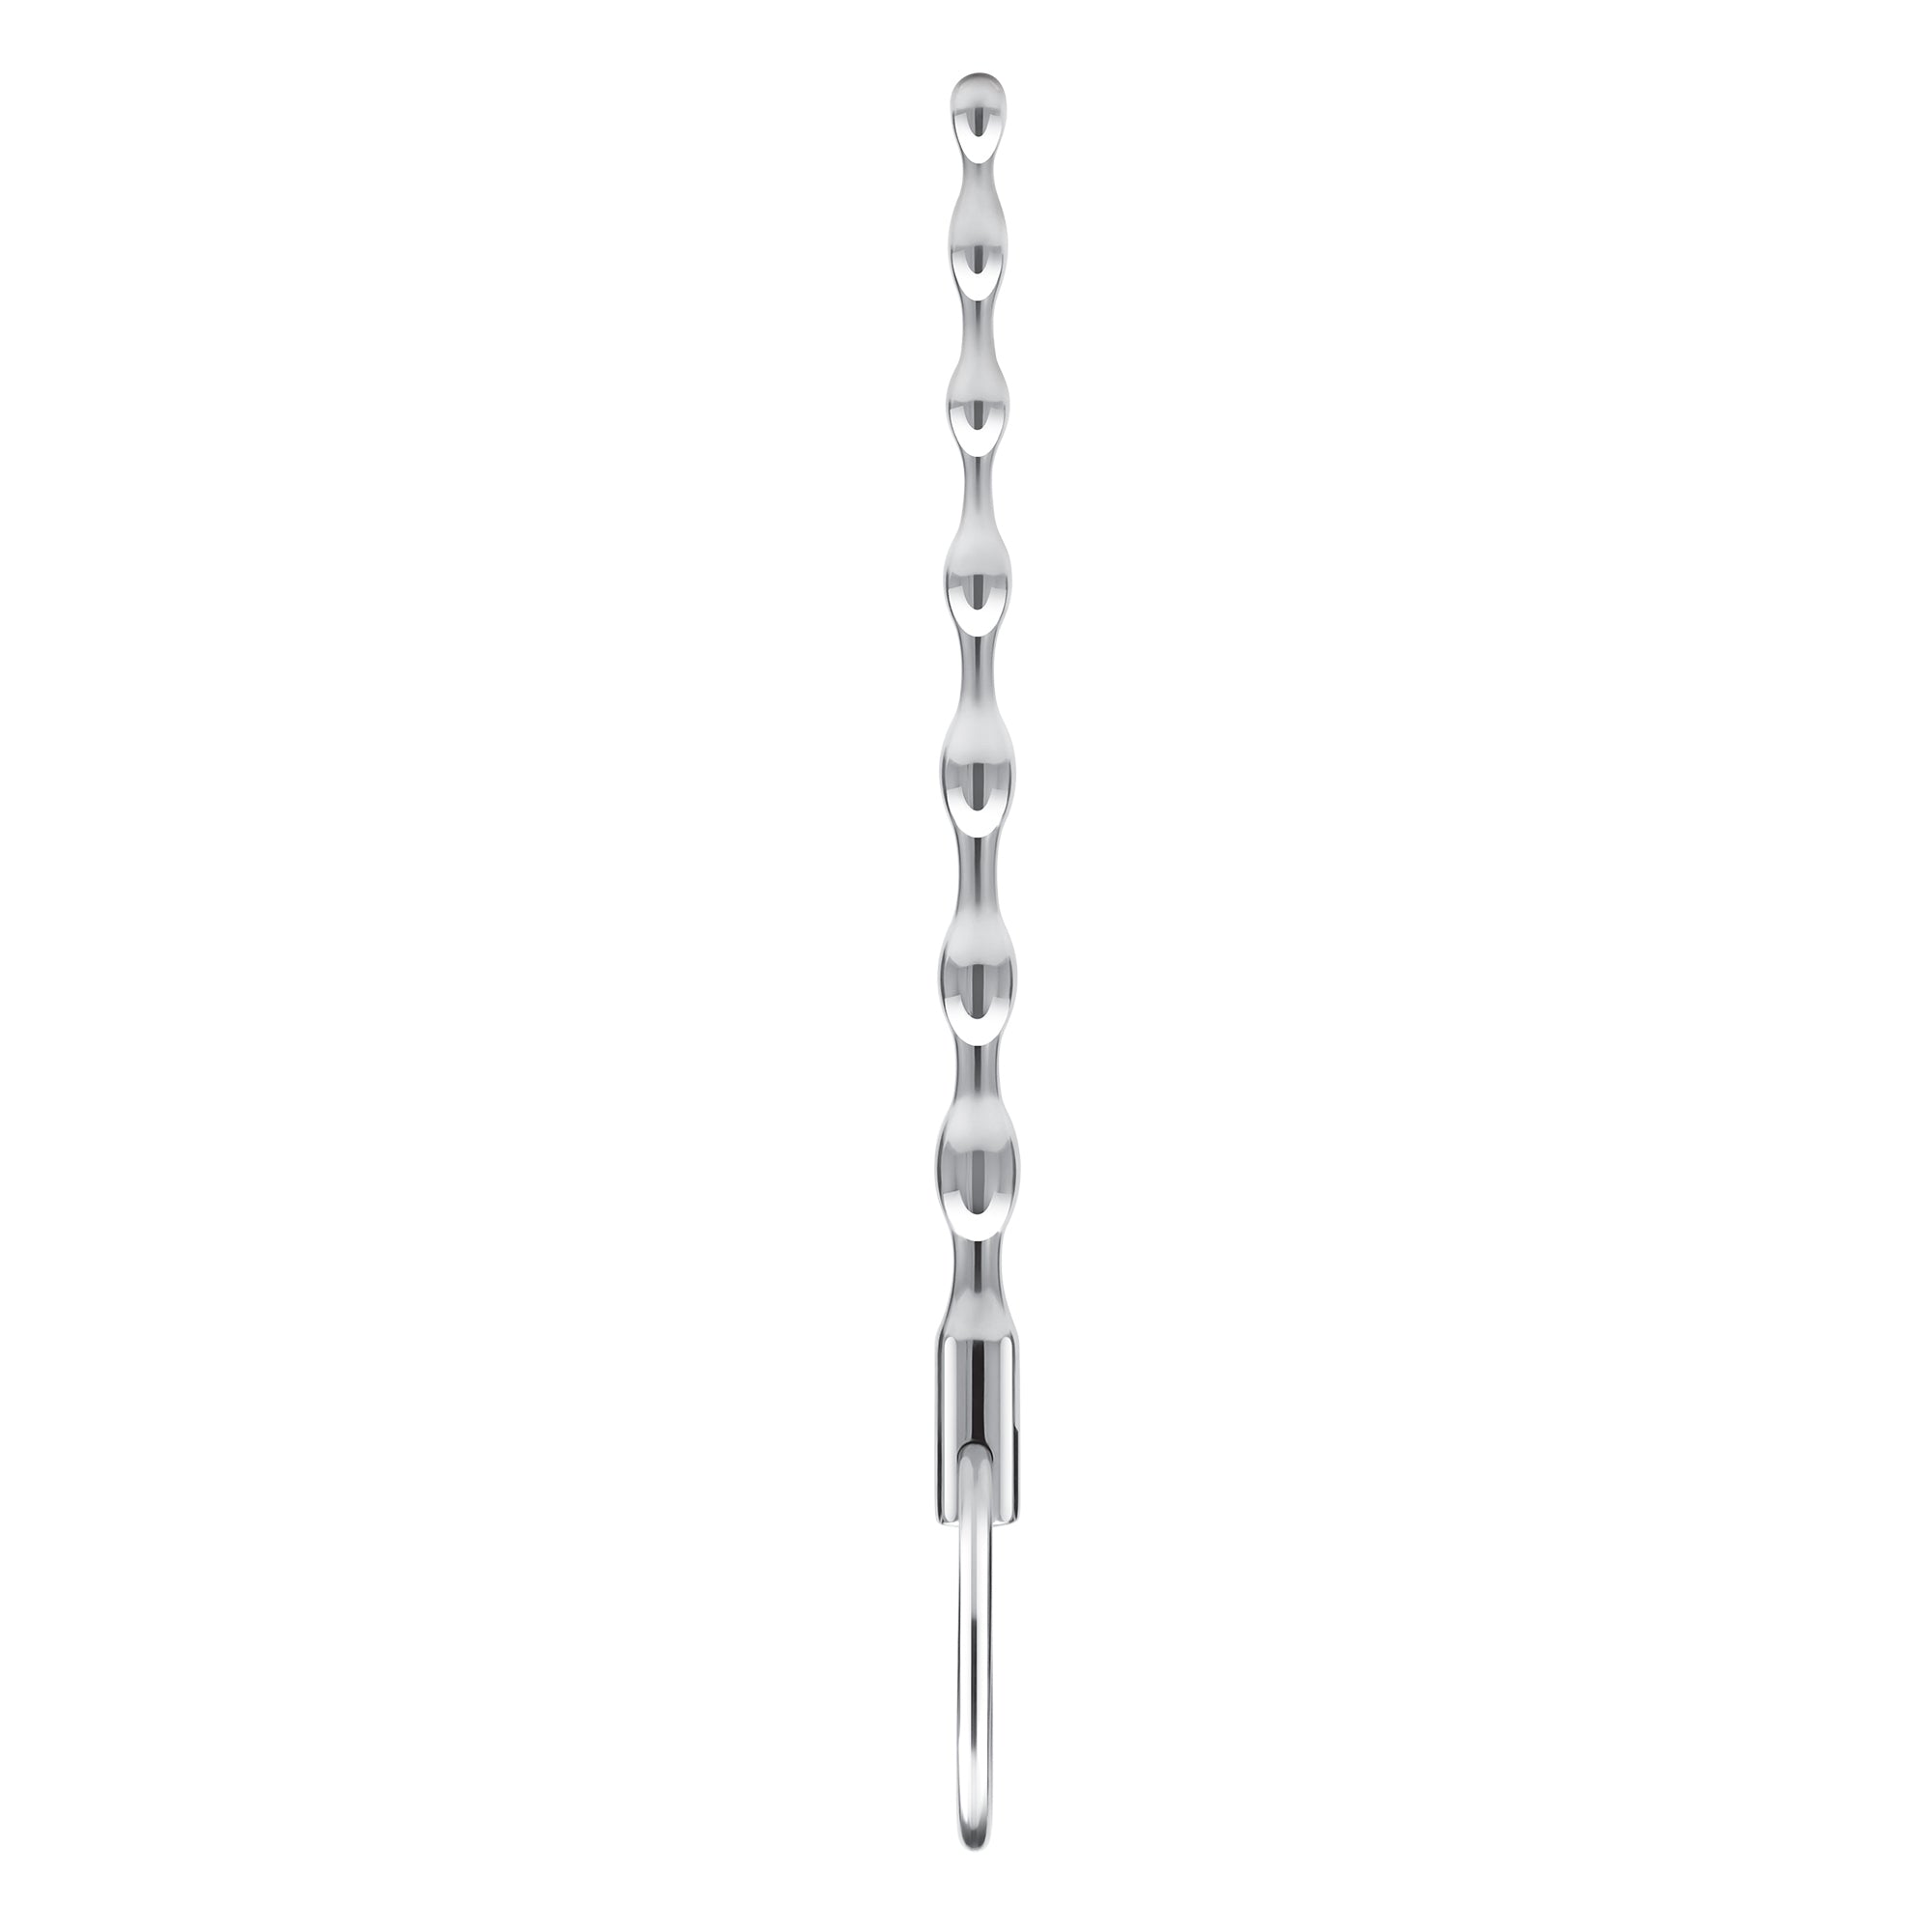 4.25" Stainless Steel Ribbed Urethral Sound